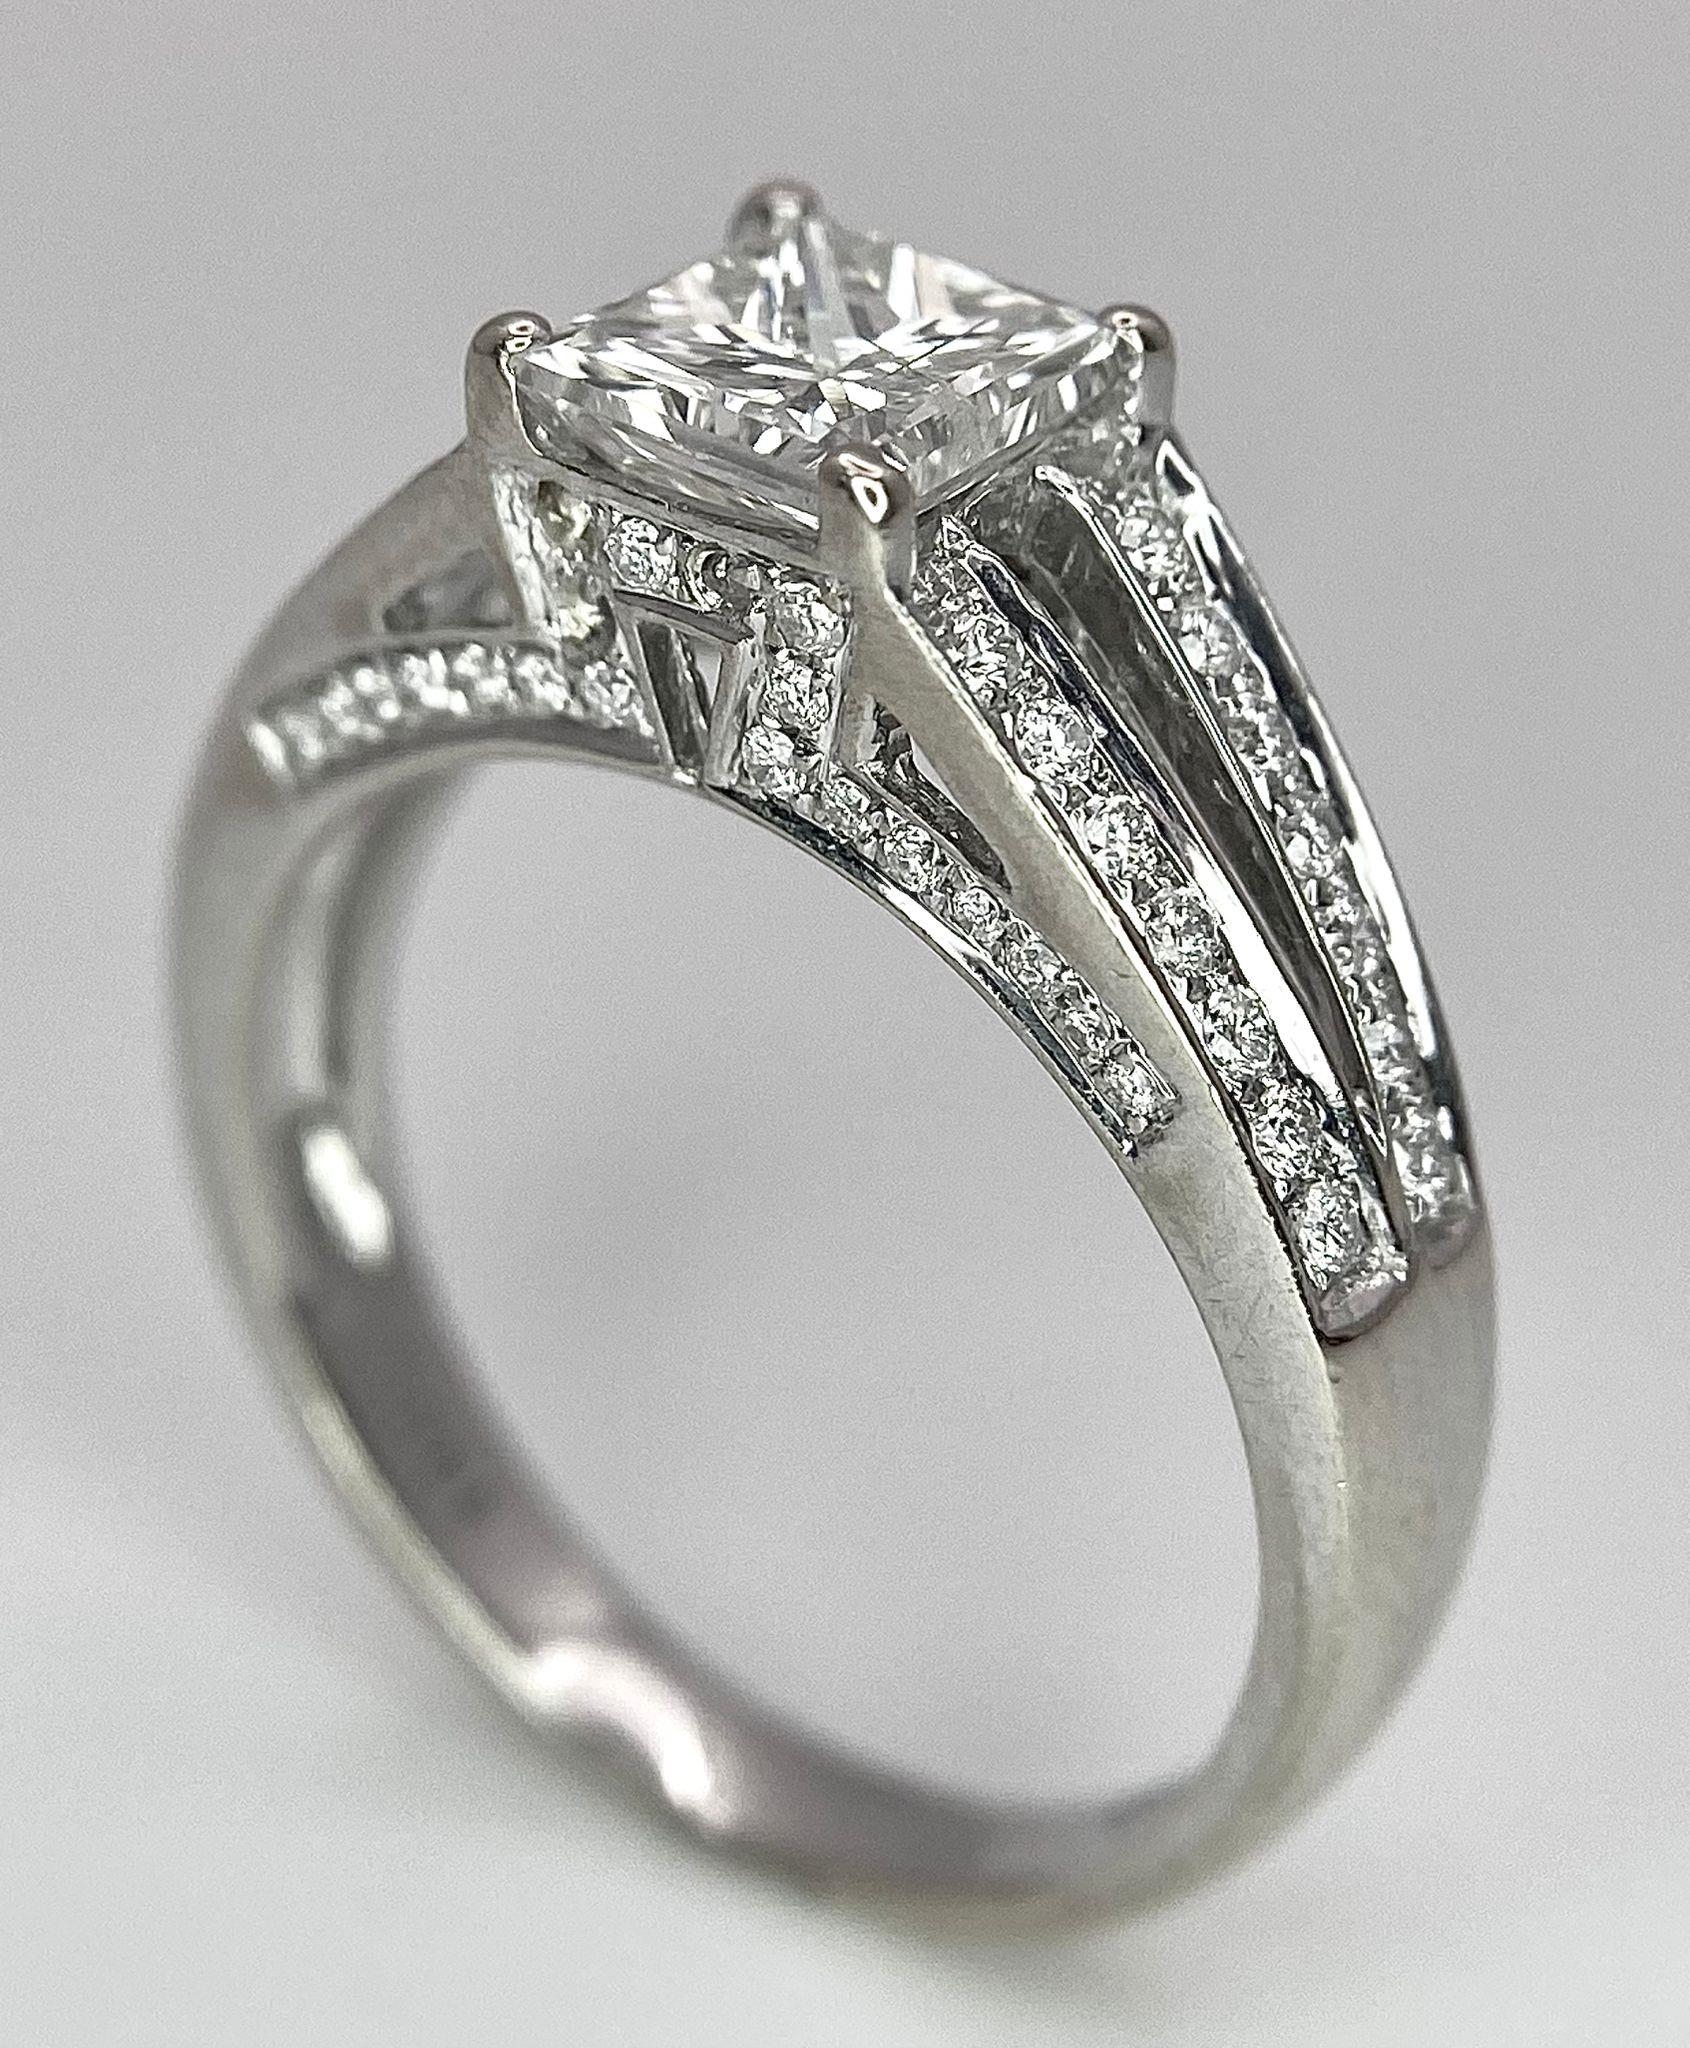 An 18K White Gold Diamond Ring. Central VS2 1ct Princess Cut Near White Diamond with Round Cut - Image 3 of 10